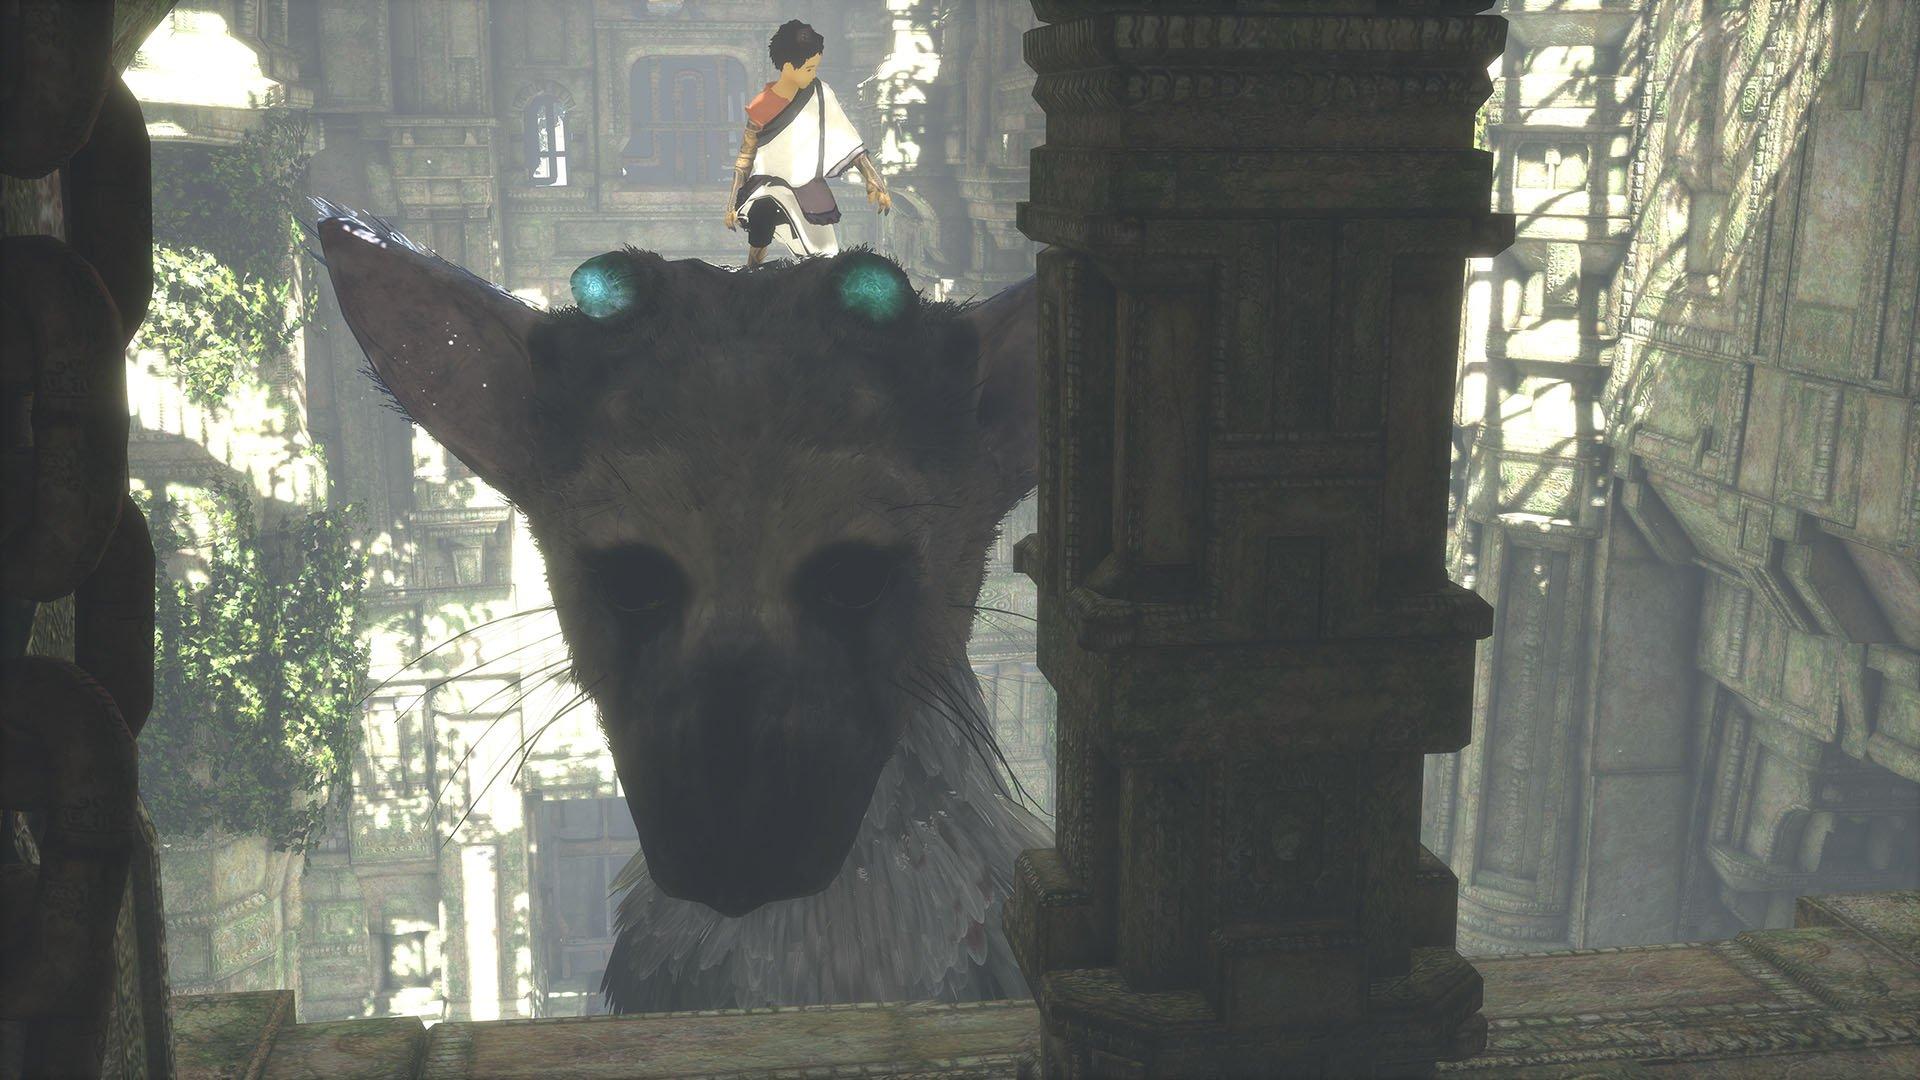 The Last Guardian - Collector's Edition - PlayStation 4